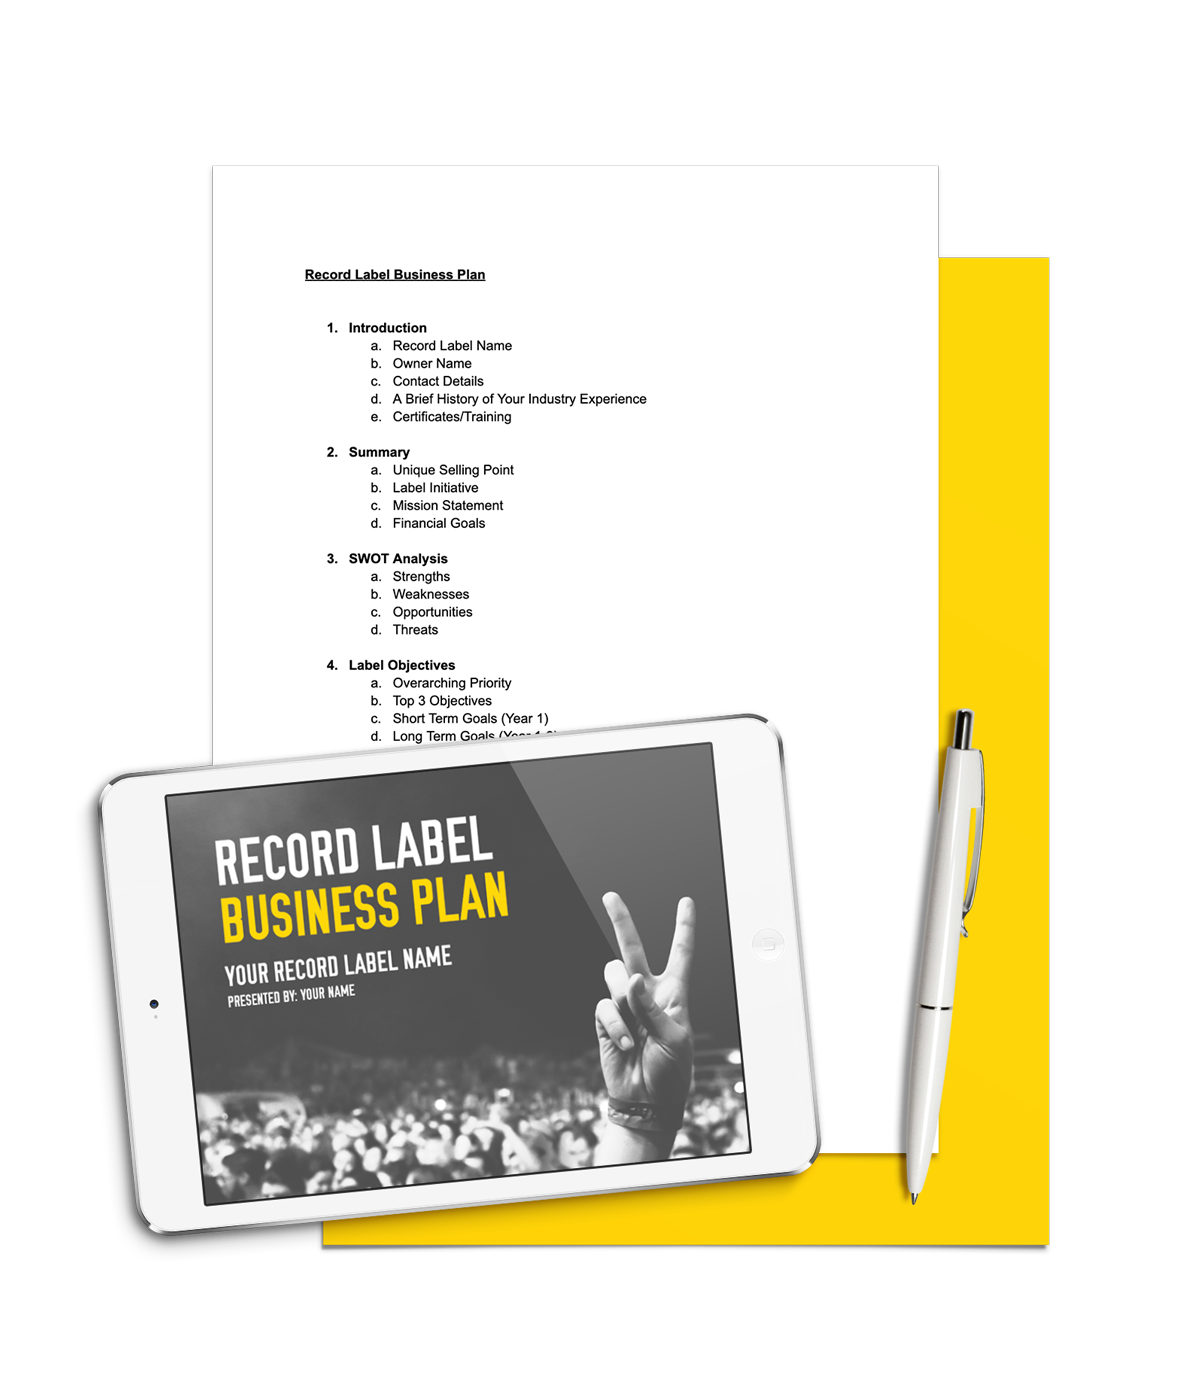 a business plan for a record label